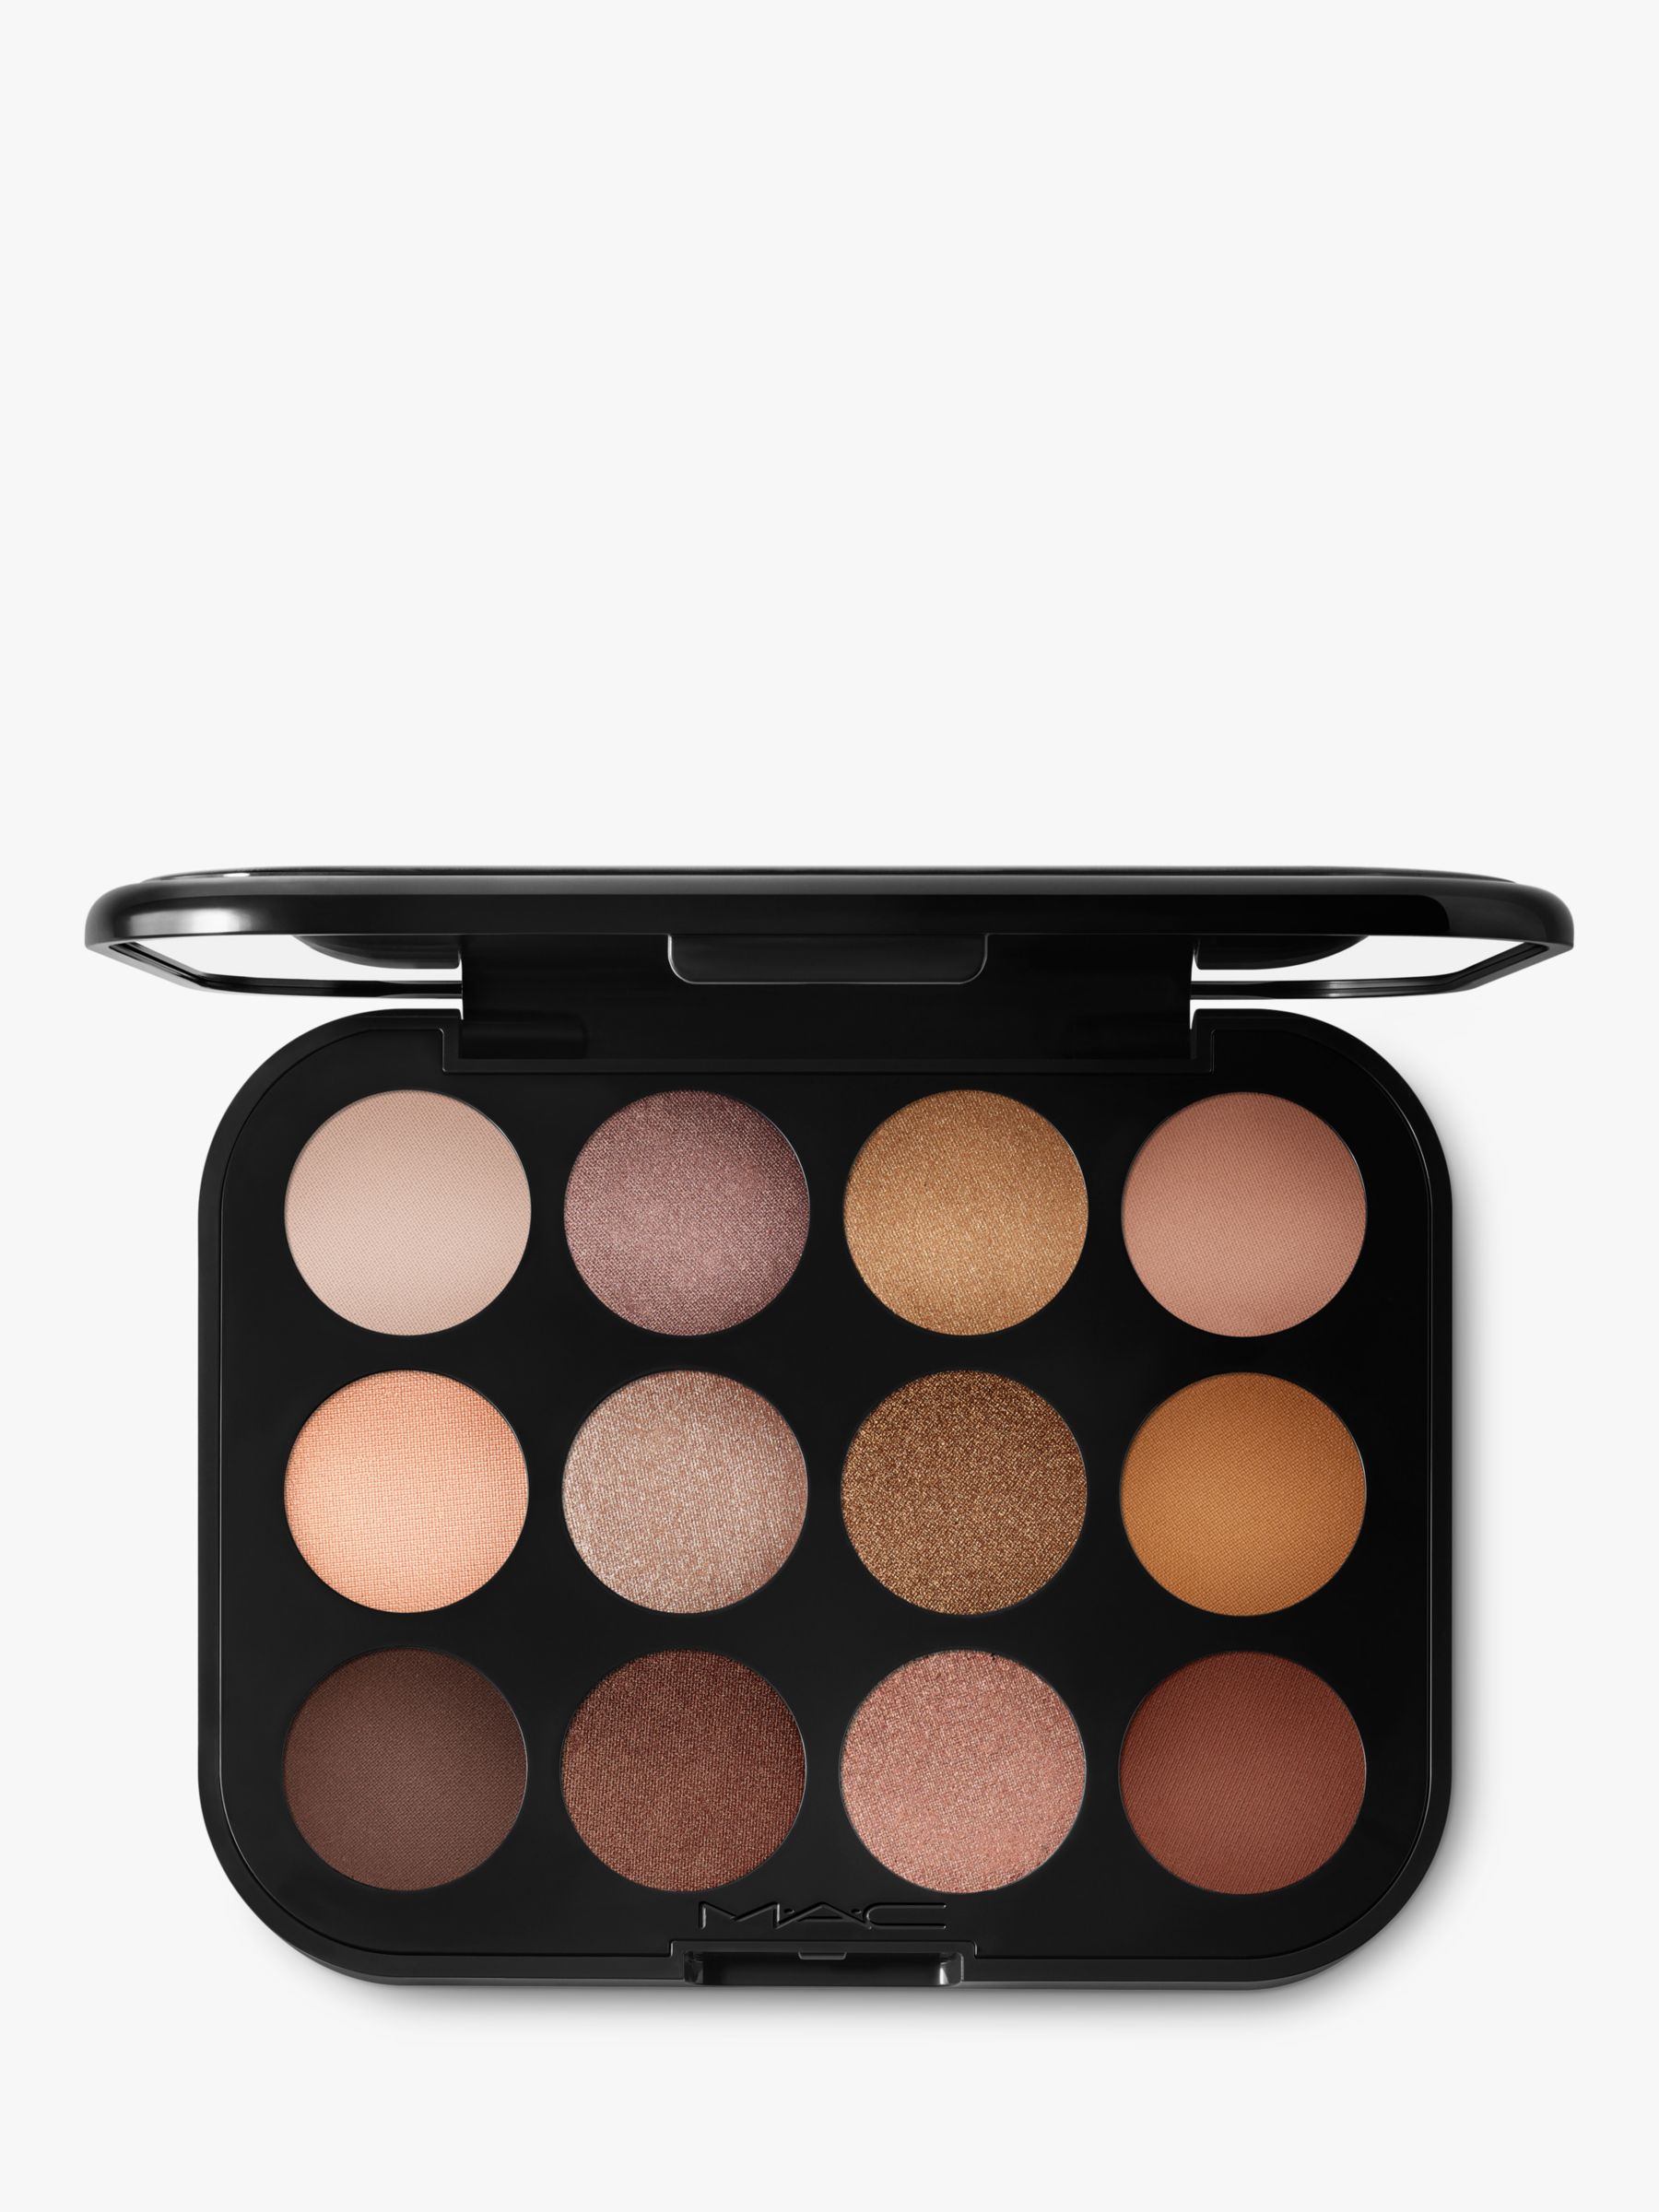 MAC Connect In Colour Eyeshadow Palette, Unfiltered Nudes